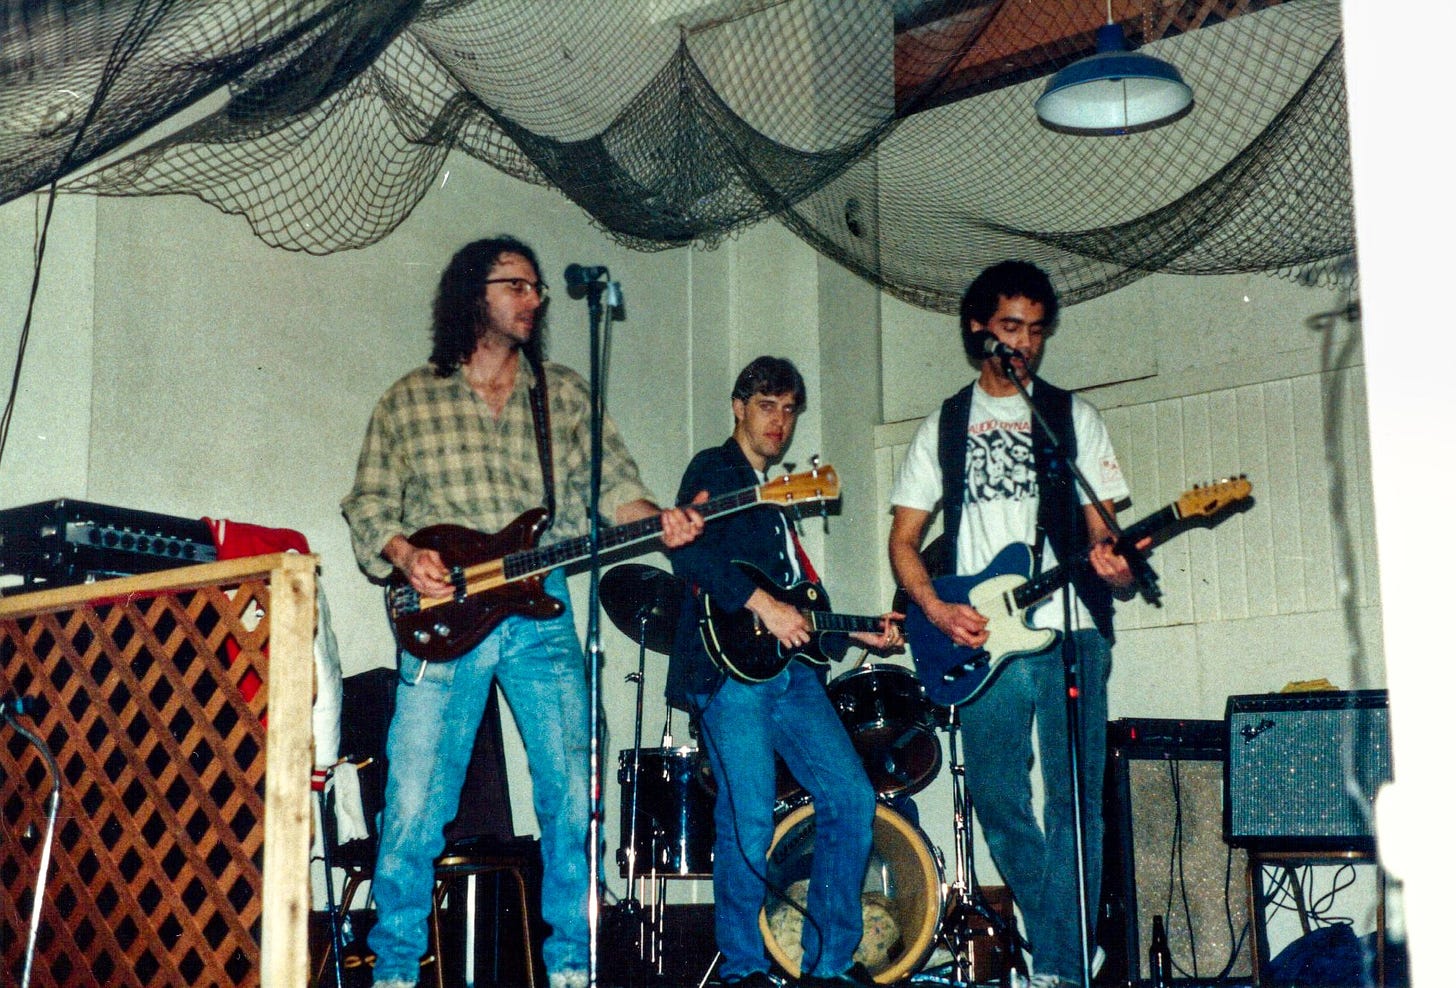 A rock band onstage in a small club